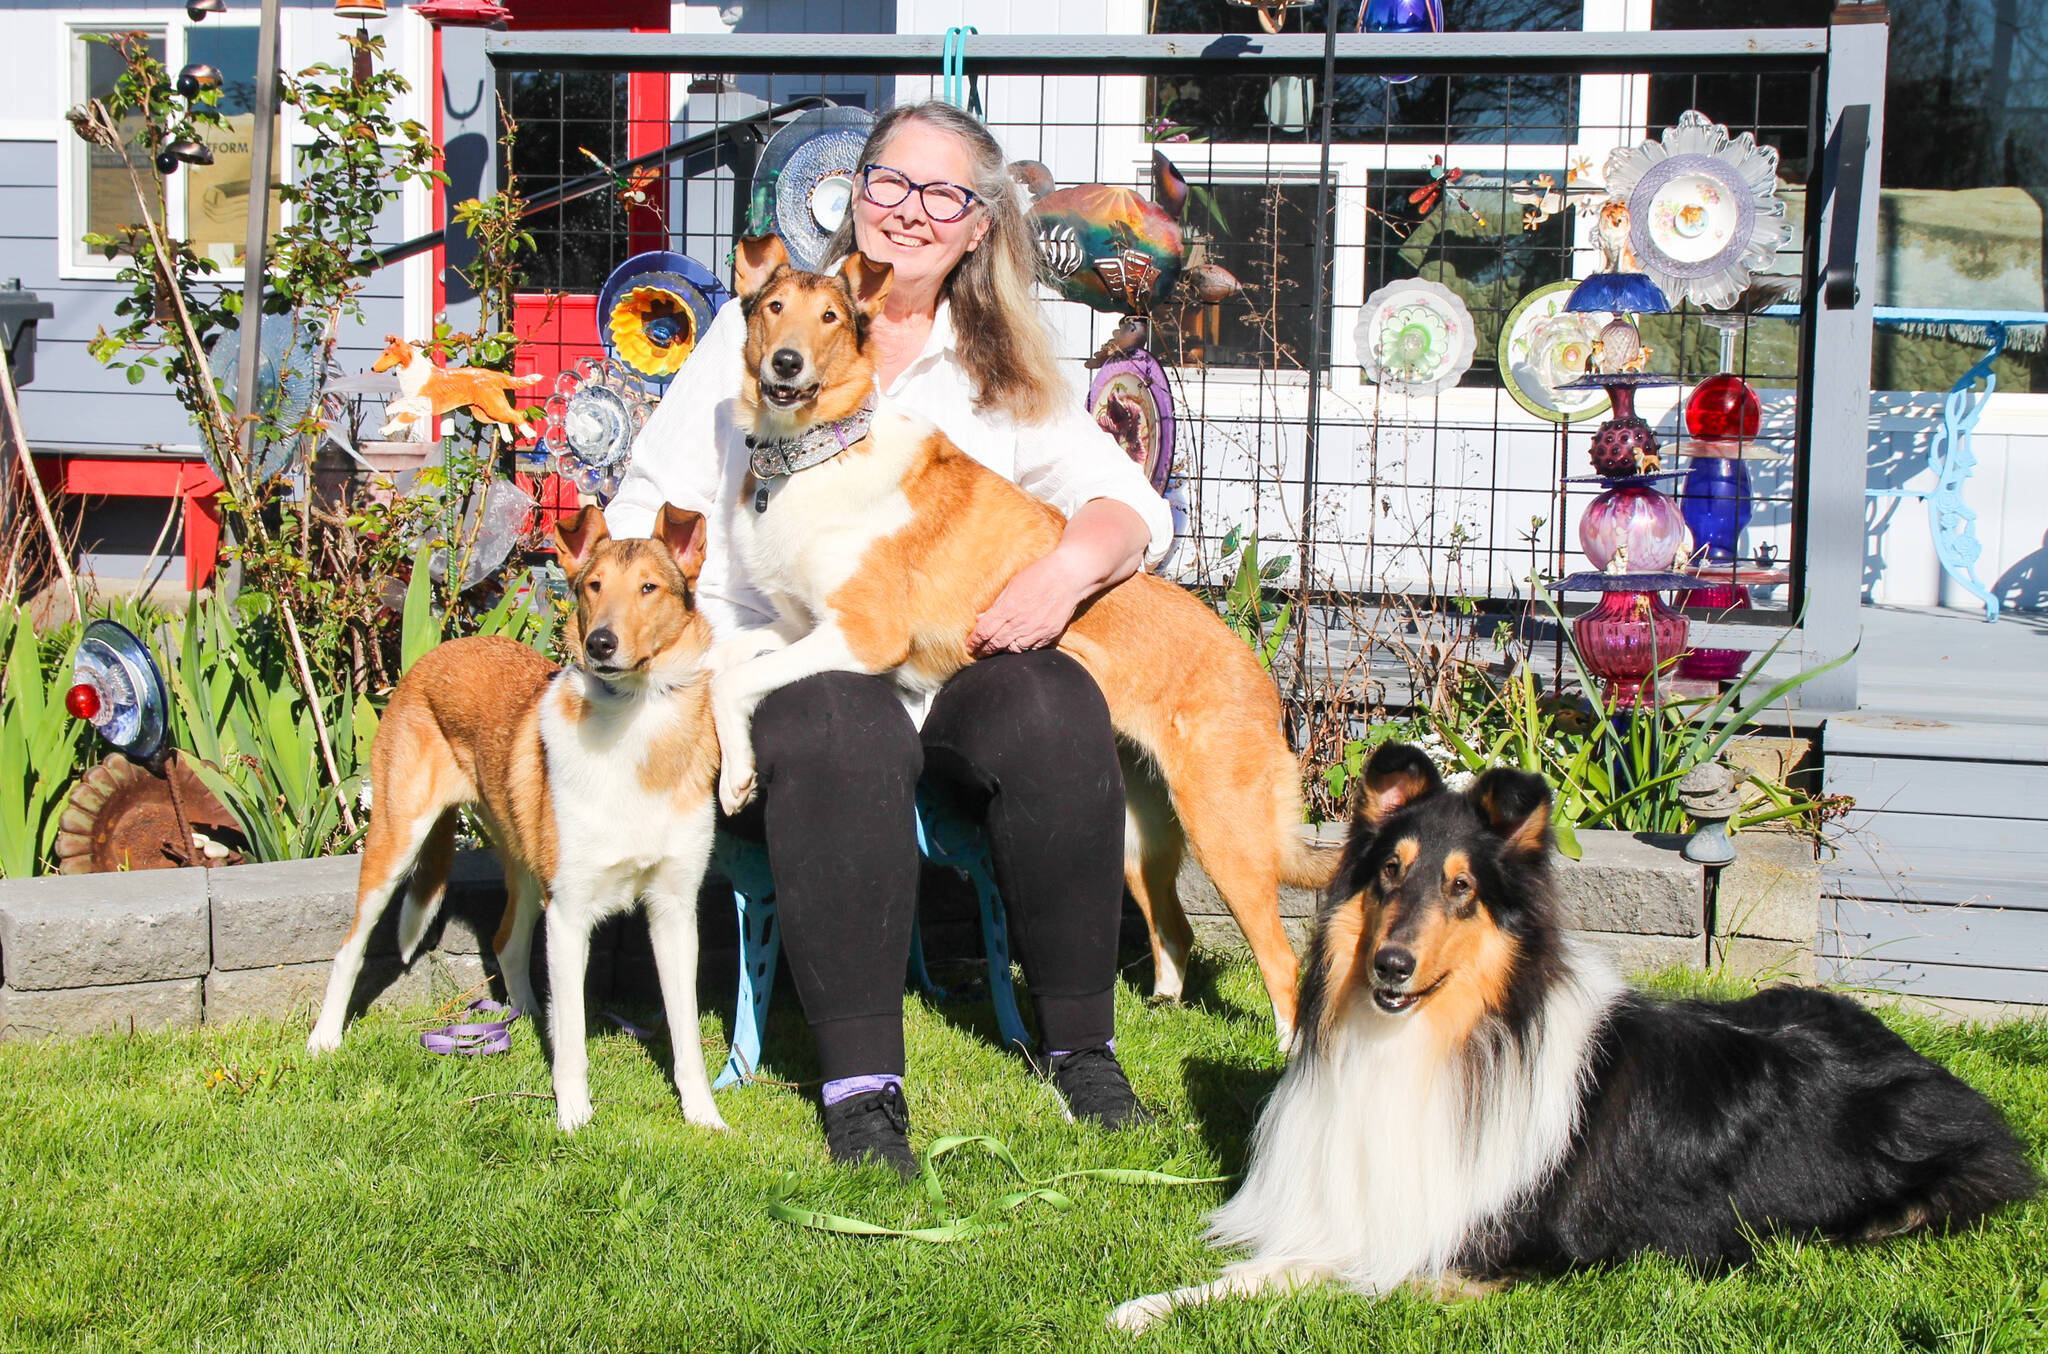 Photo by Luisa Loi
Corinne Boon poses with three collies she bred: Tsunami (2), at left, Maree (5) and Vision (2). According to Boon, who owns Maree, the dogs have been going to “sheep school,” where they learn how to herd sheep.